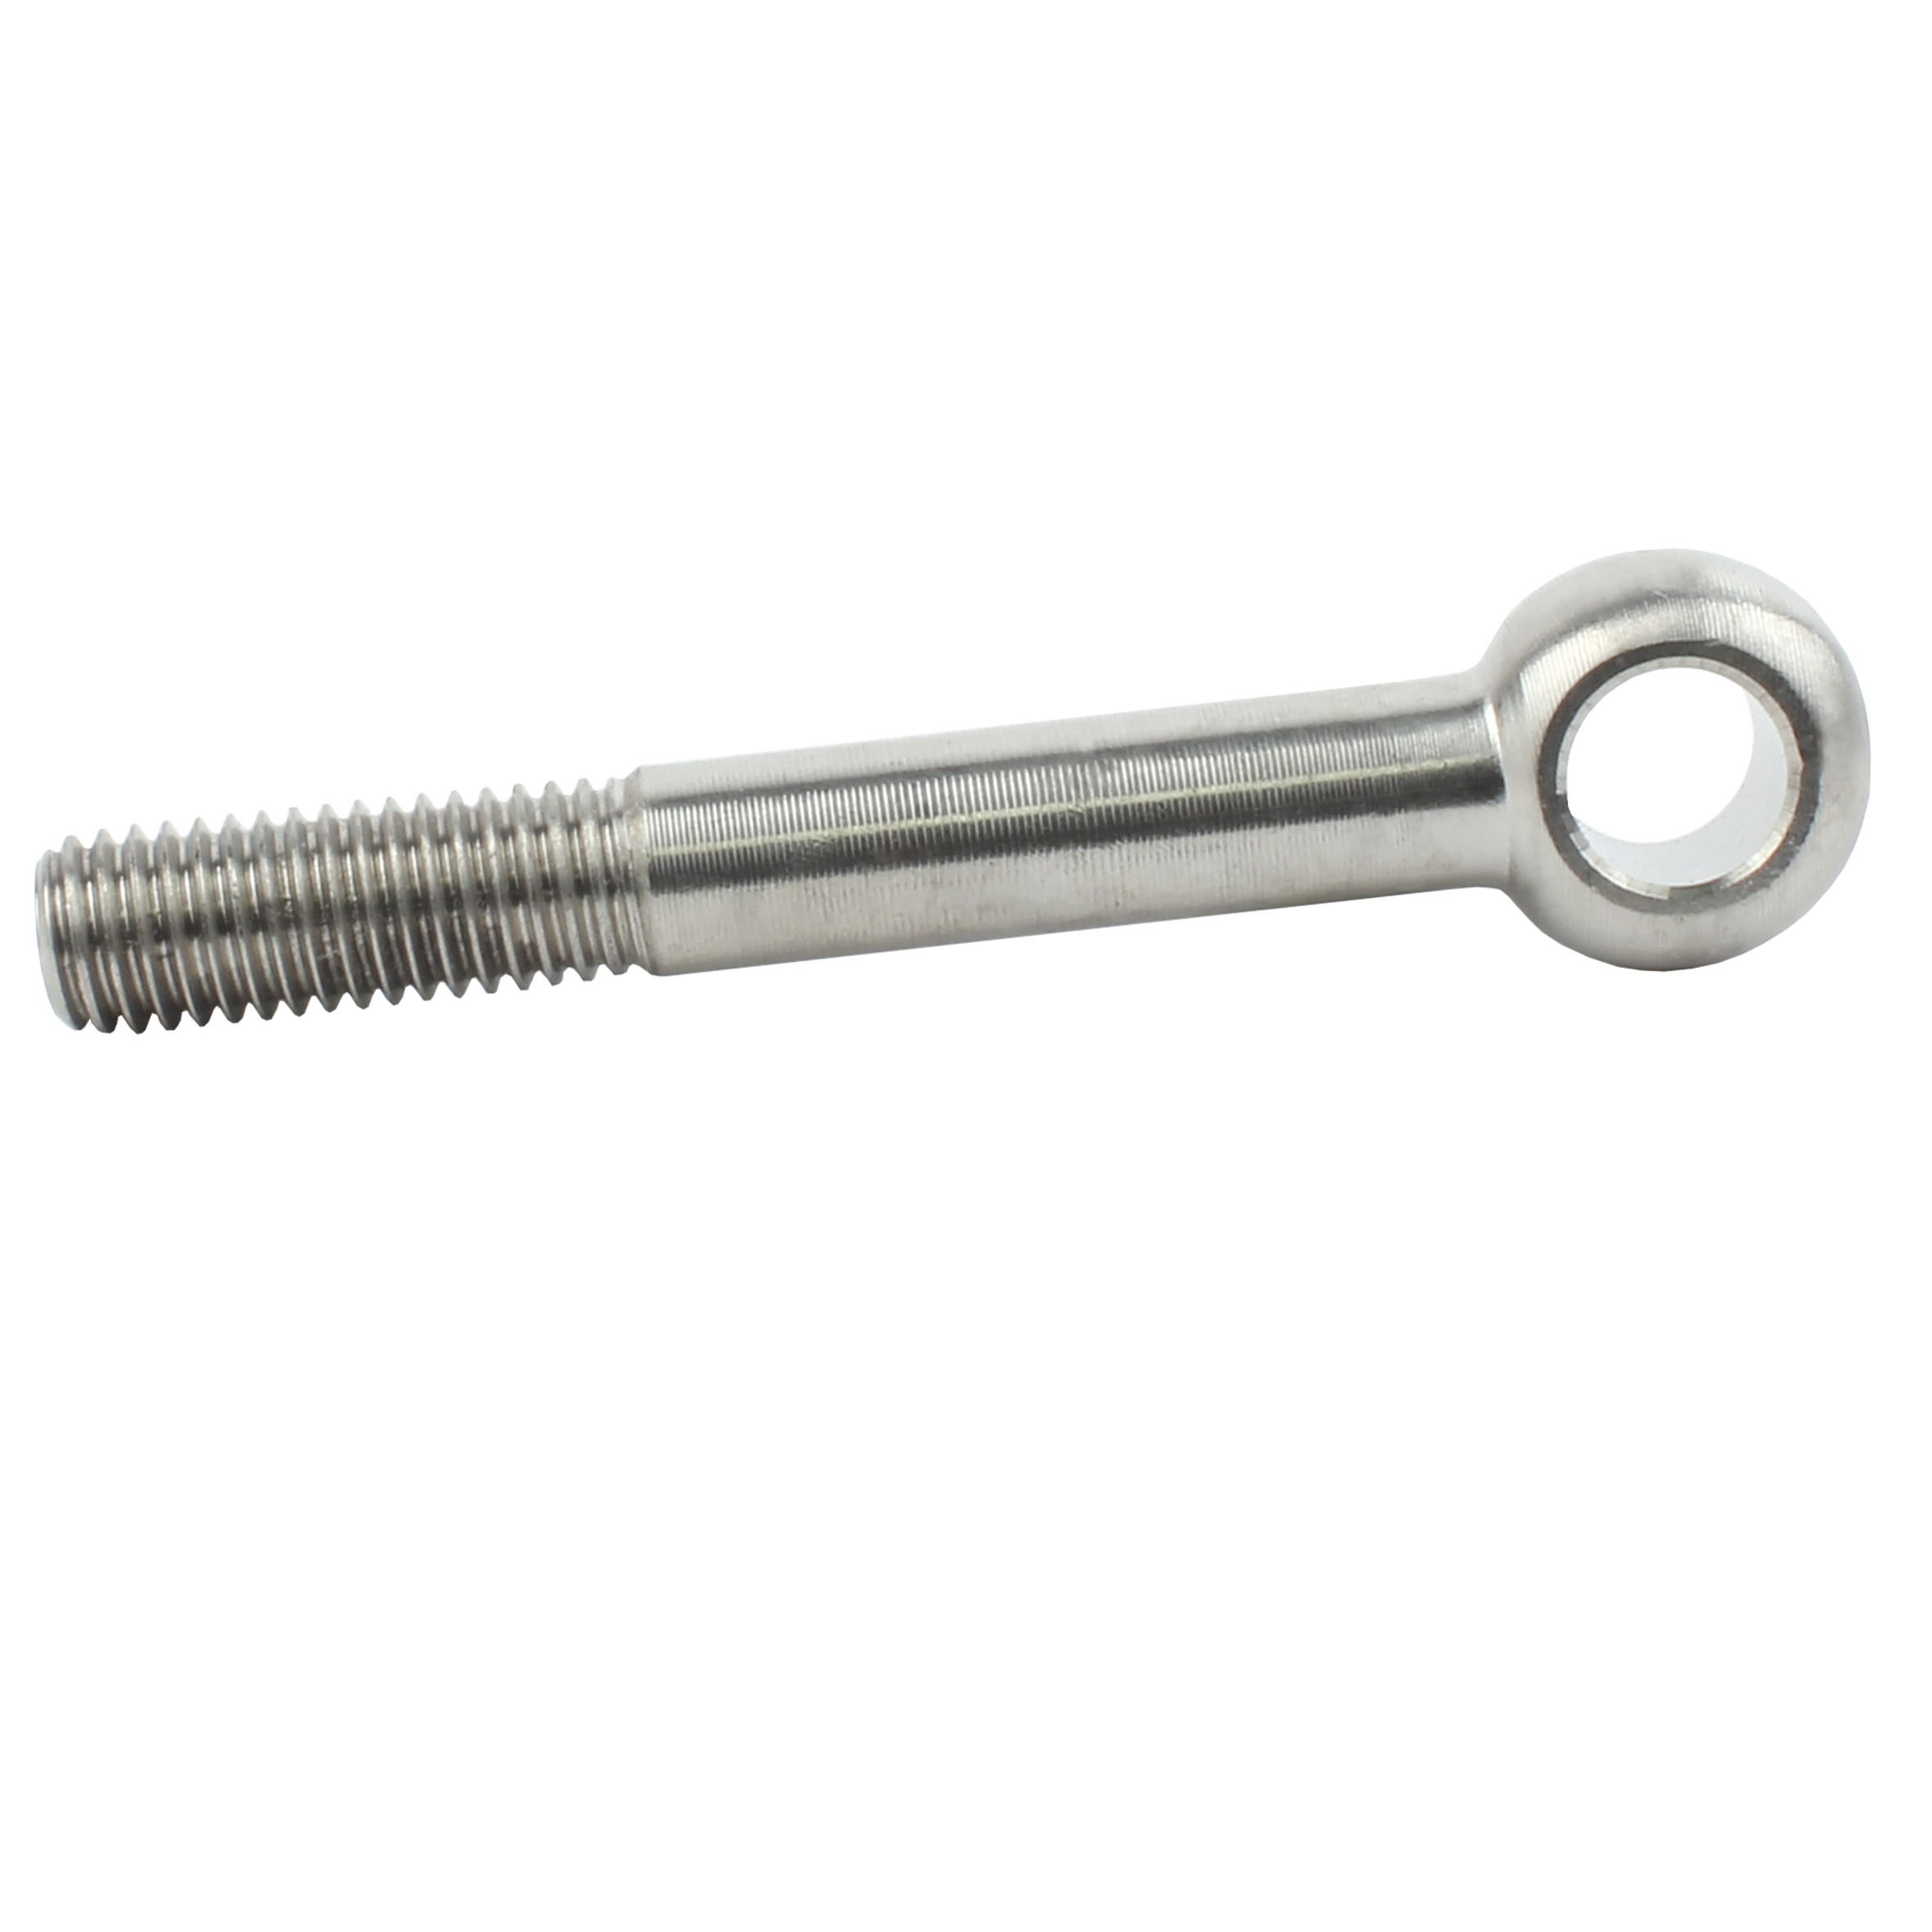 Male eye bolt stainless steel - Stainless steel - Male - M5-M16